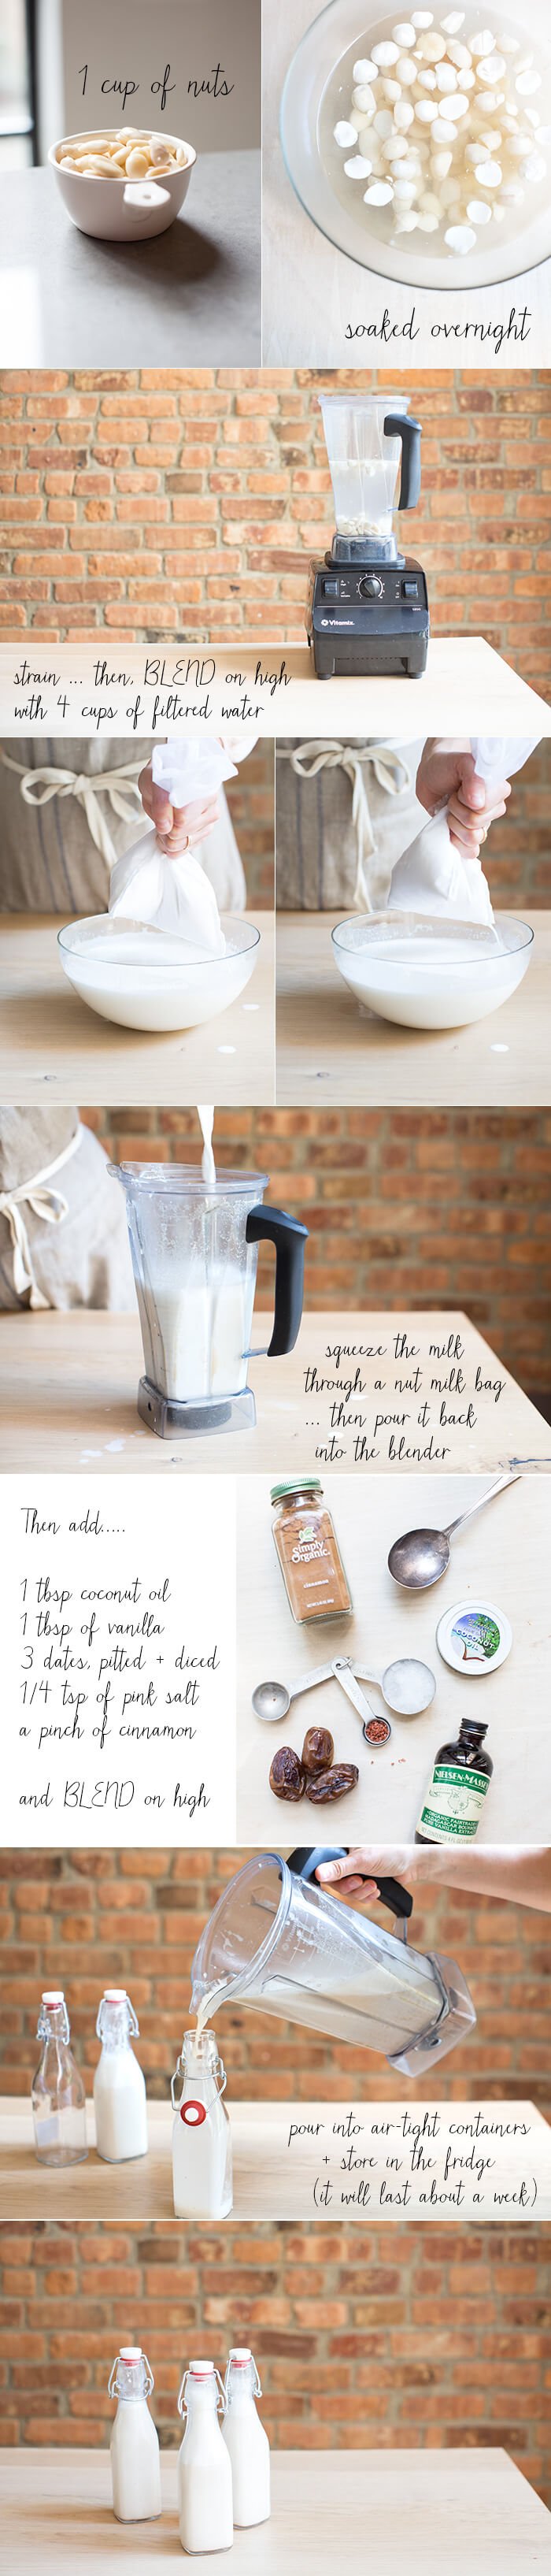 how+to+make+the+most+delicious+nut+milk+-+a+step+by+step+guide+with+pictures!+……+via-+what's+cooking+good+looking